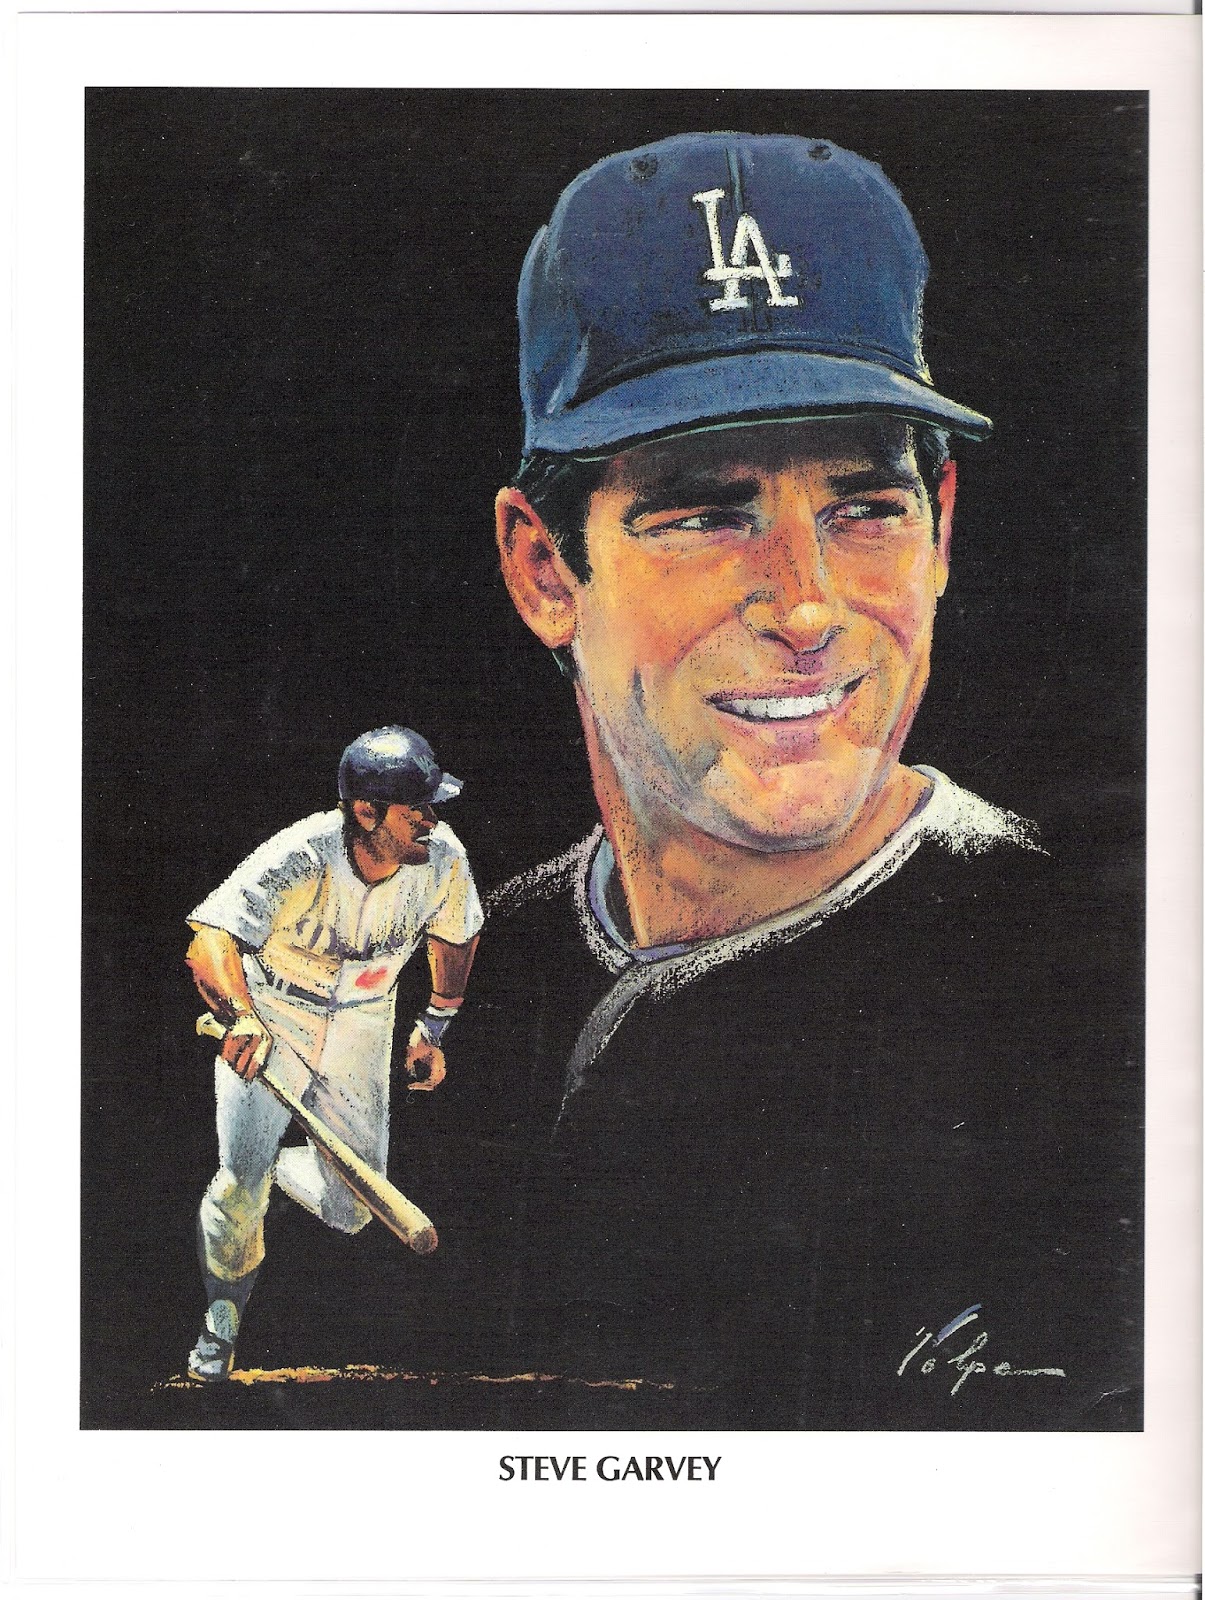 Tubbs Baseball Blog: A Look at Steve Garvey's Impressive Career and a Trip  Down Memory Lane to Explore the Baseball Cards I Collected of the Slugger  During My Childhood